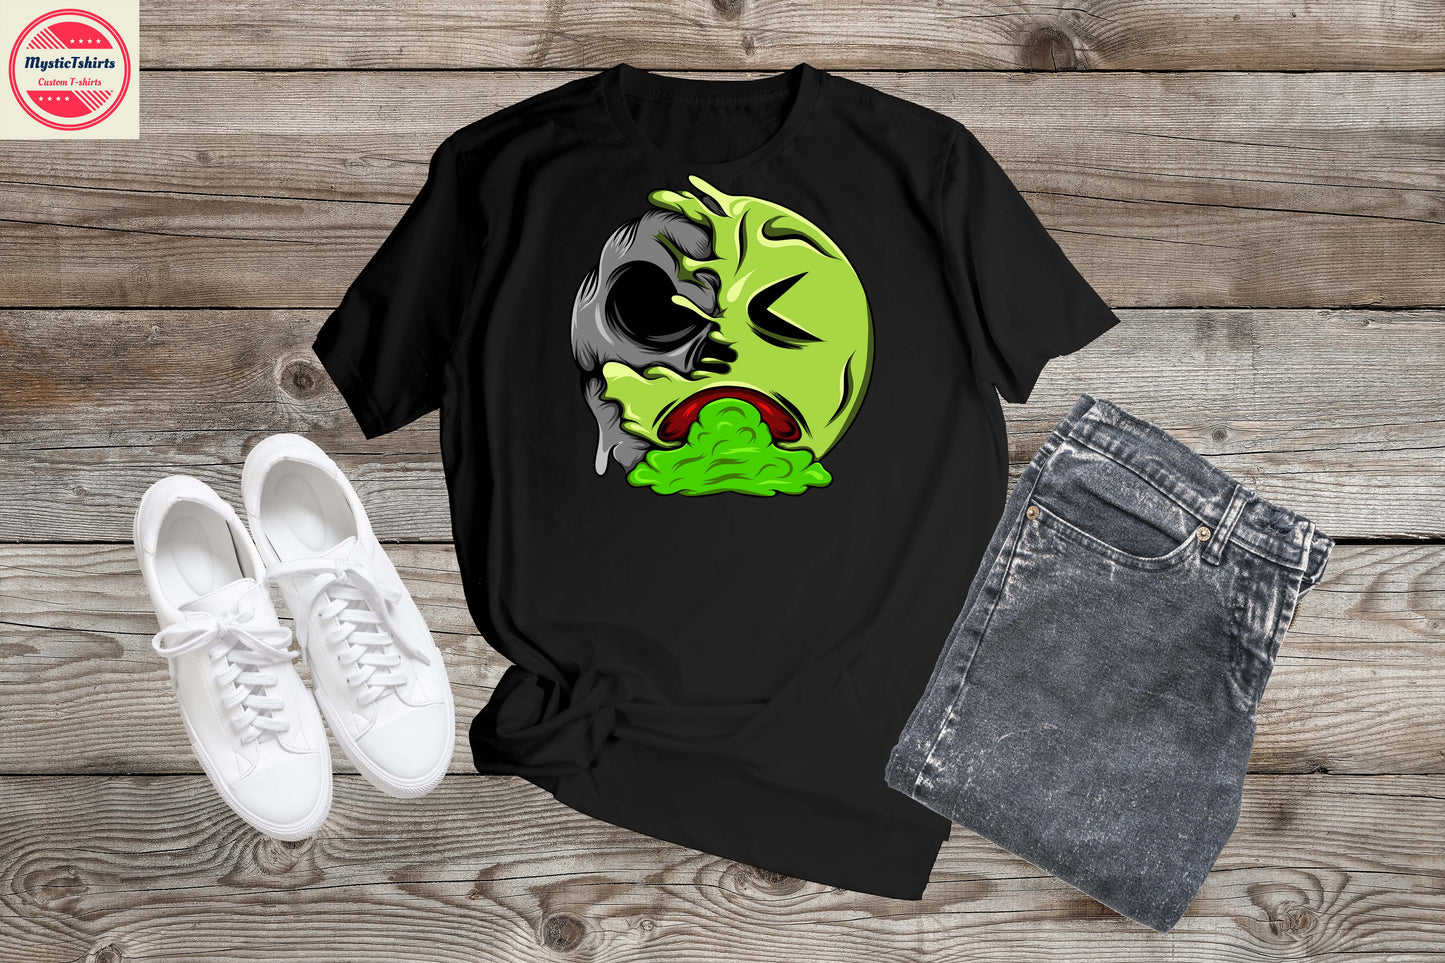 069. CRAZY FACE, Personalized T-Shirt, Custom Text, Make Your Own Shirt, Custom Tee